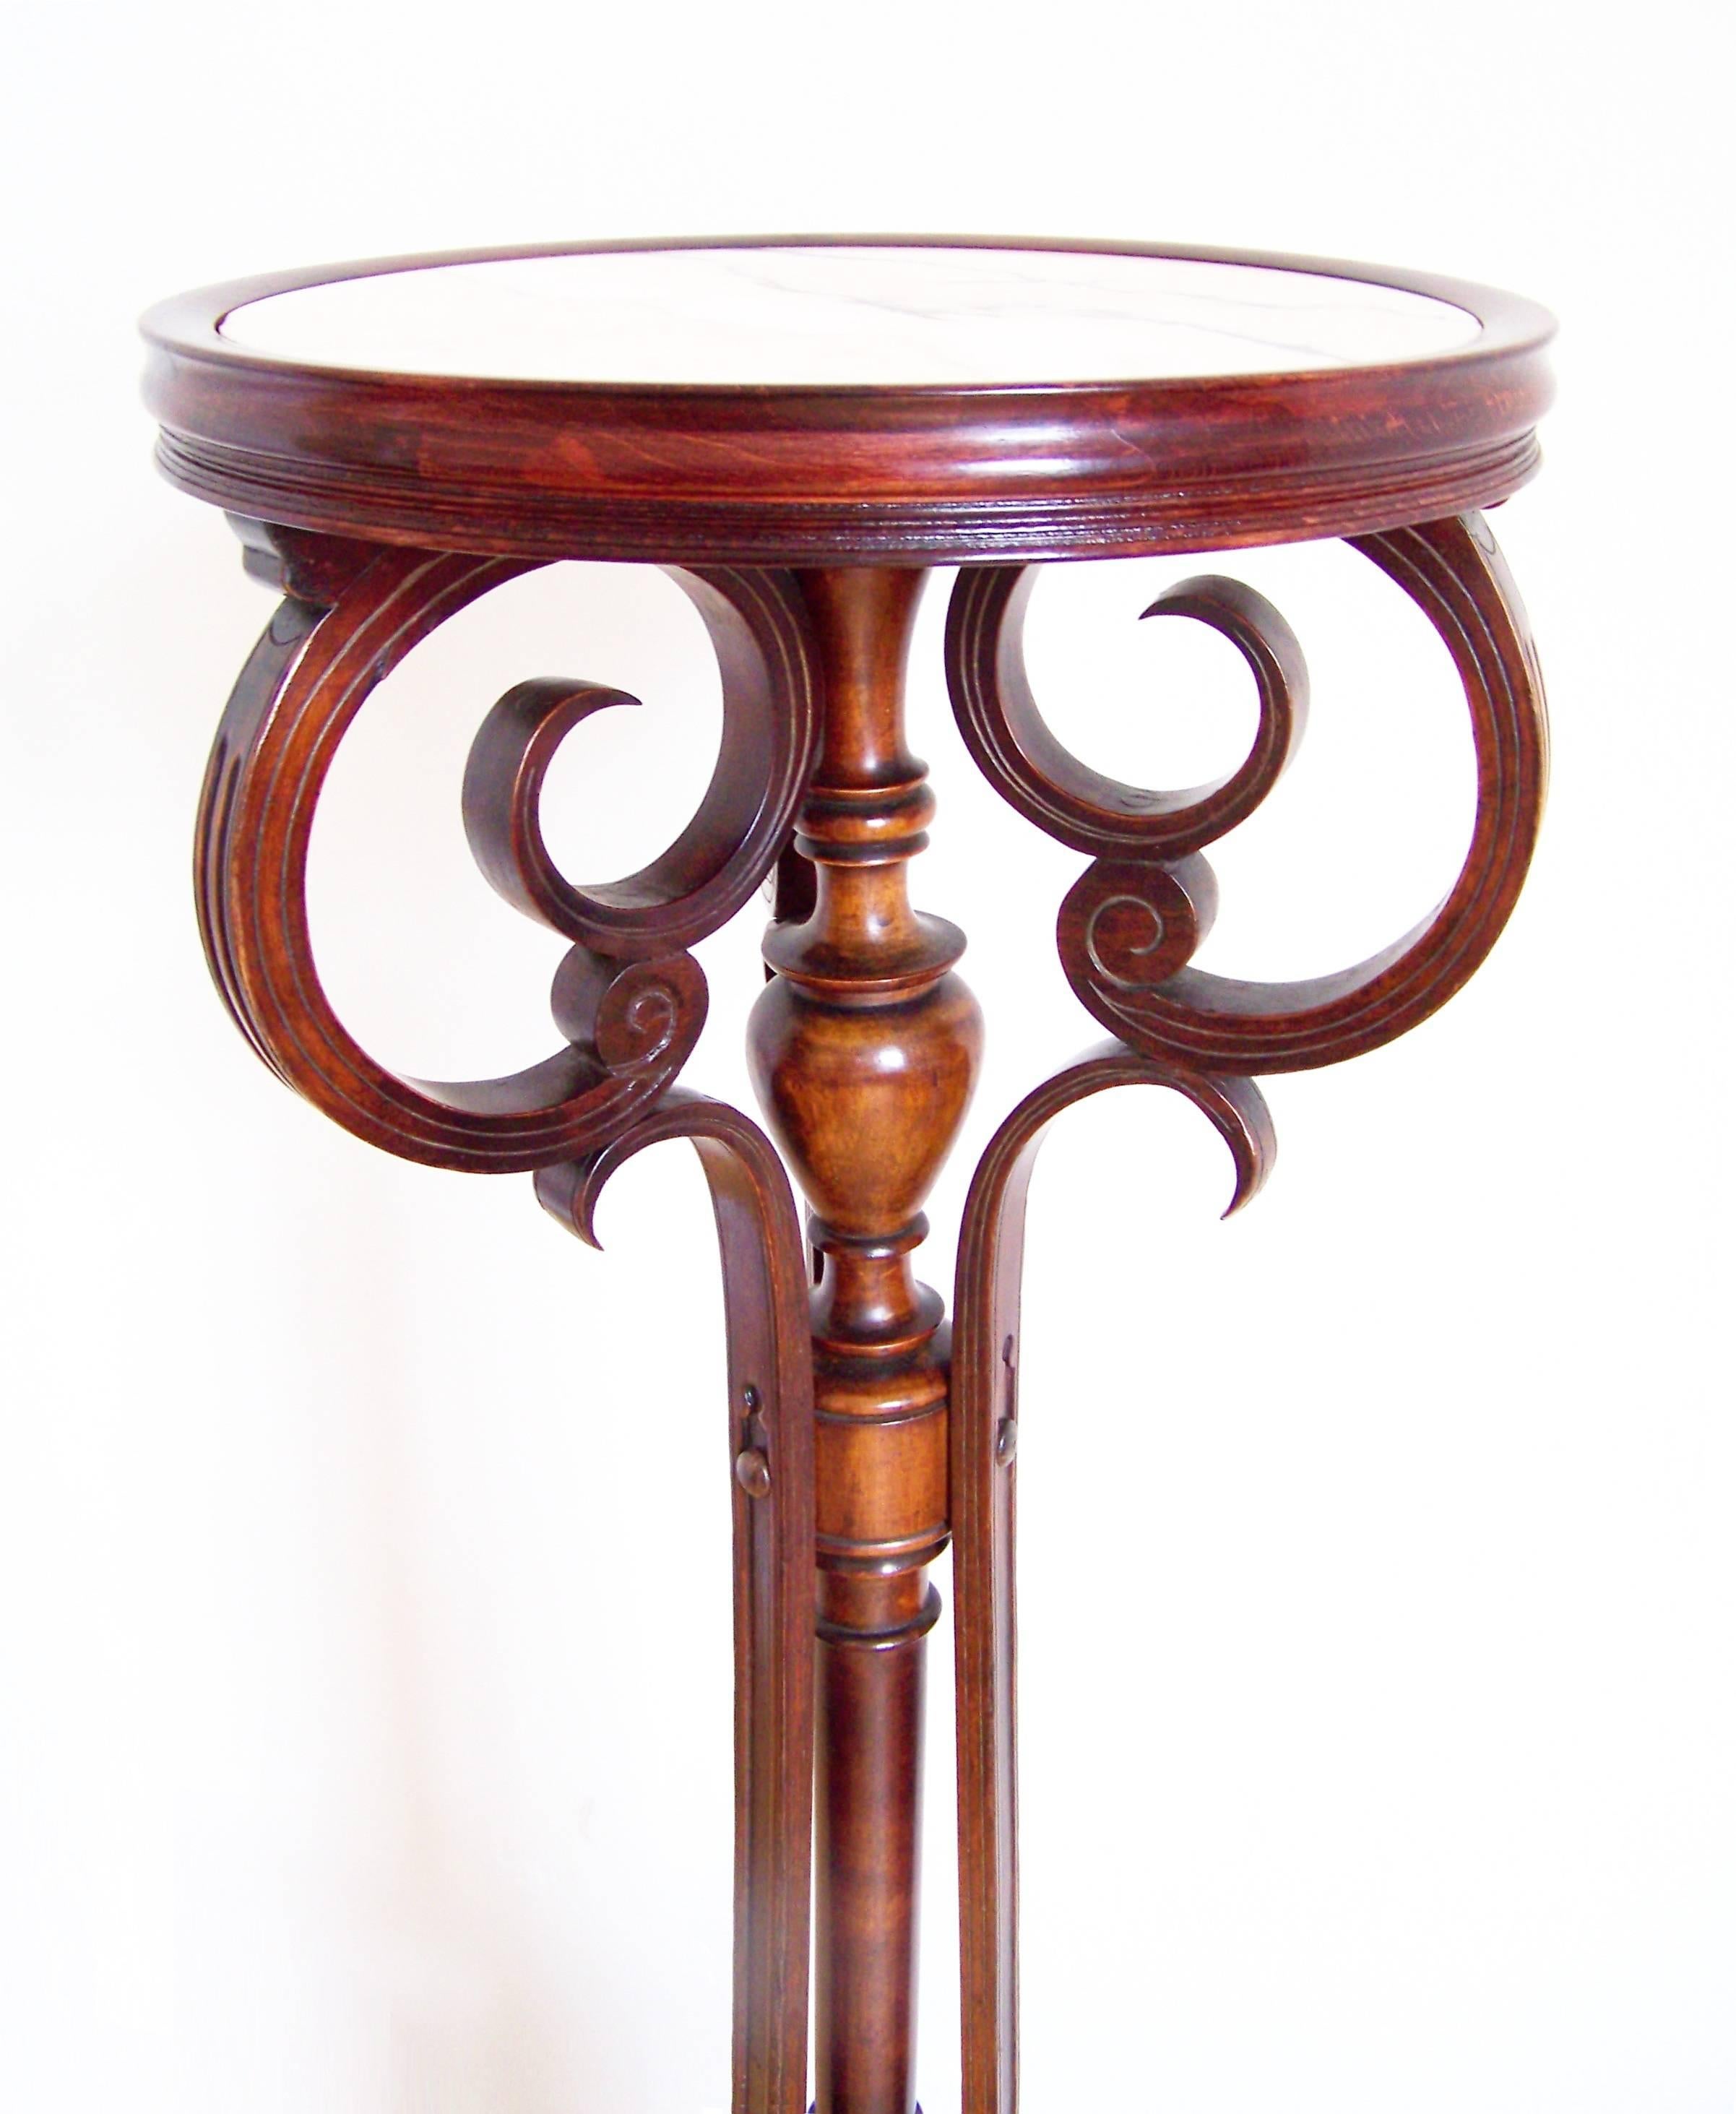 Pedestal was manufactured in Austria by company Jacob and Josef Kohn at the beginning of the 19th century. It is a rare product of this company, intended for luxury saloons. The only known depiction of the pedestal is in the sales catalog from 1904.